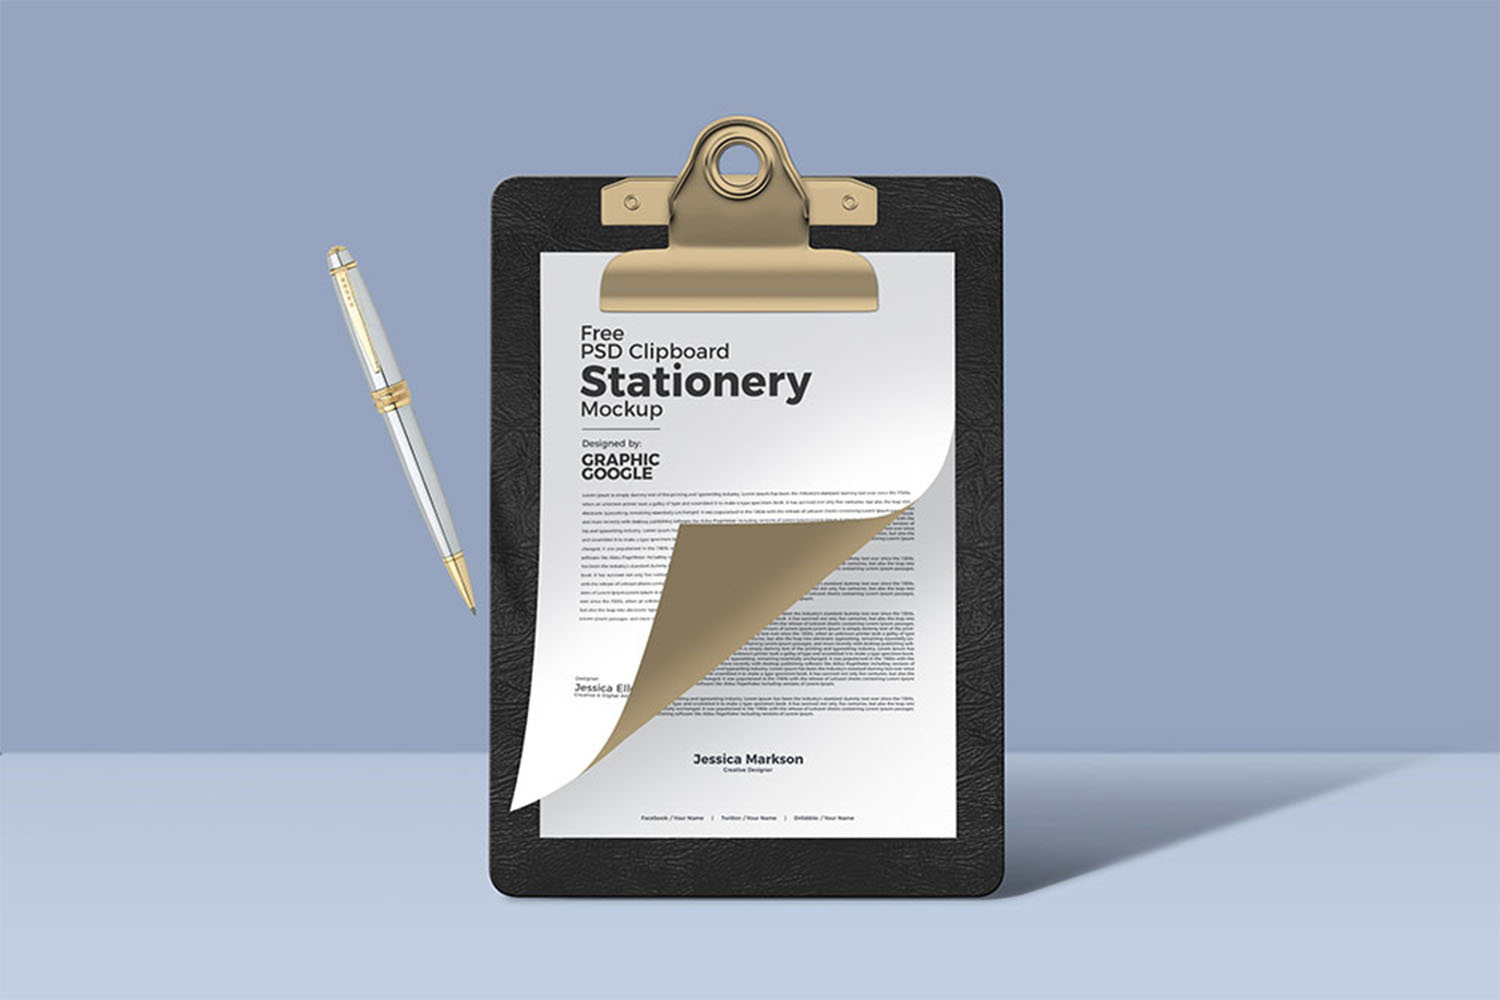 PSD Clipboard Stationery Mockup free download